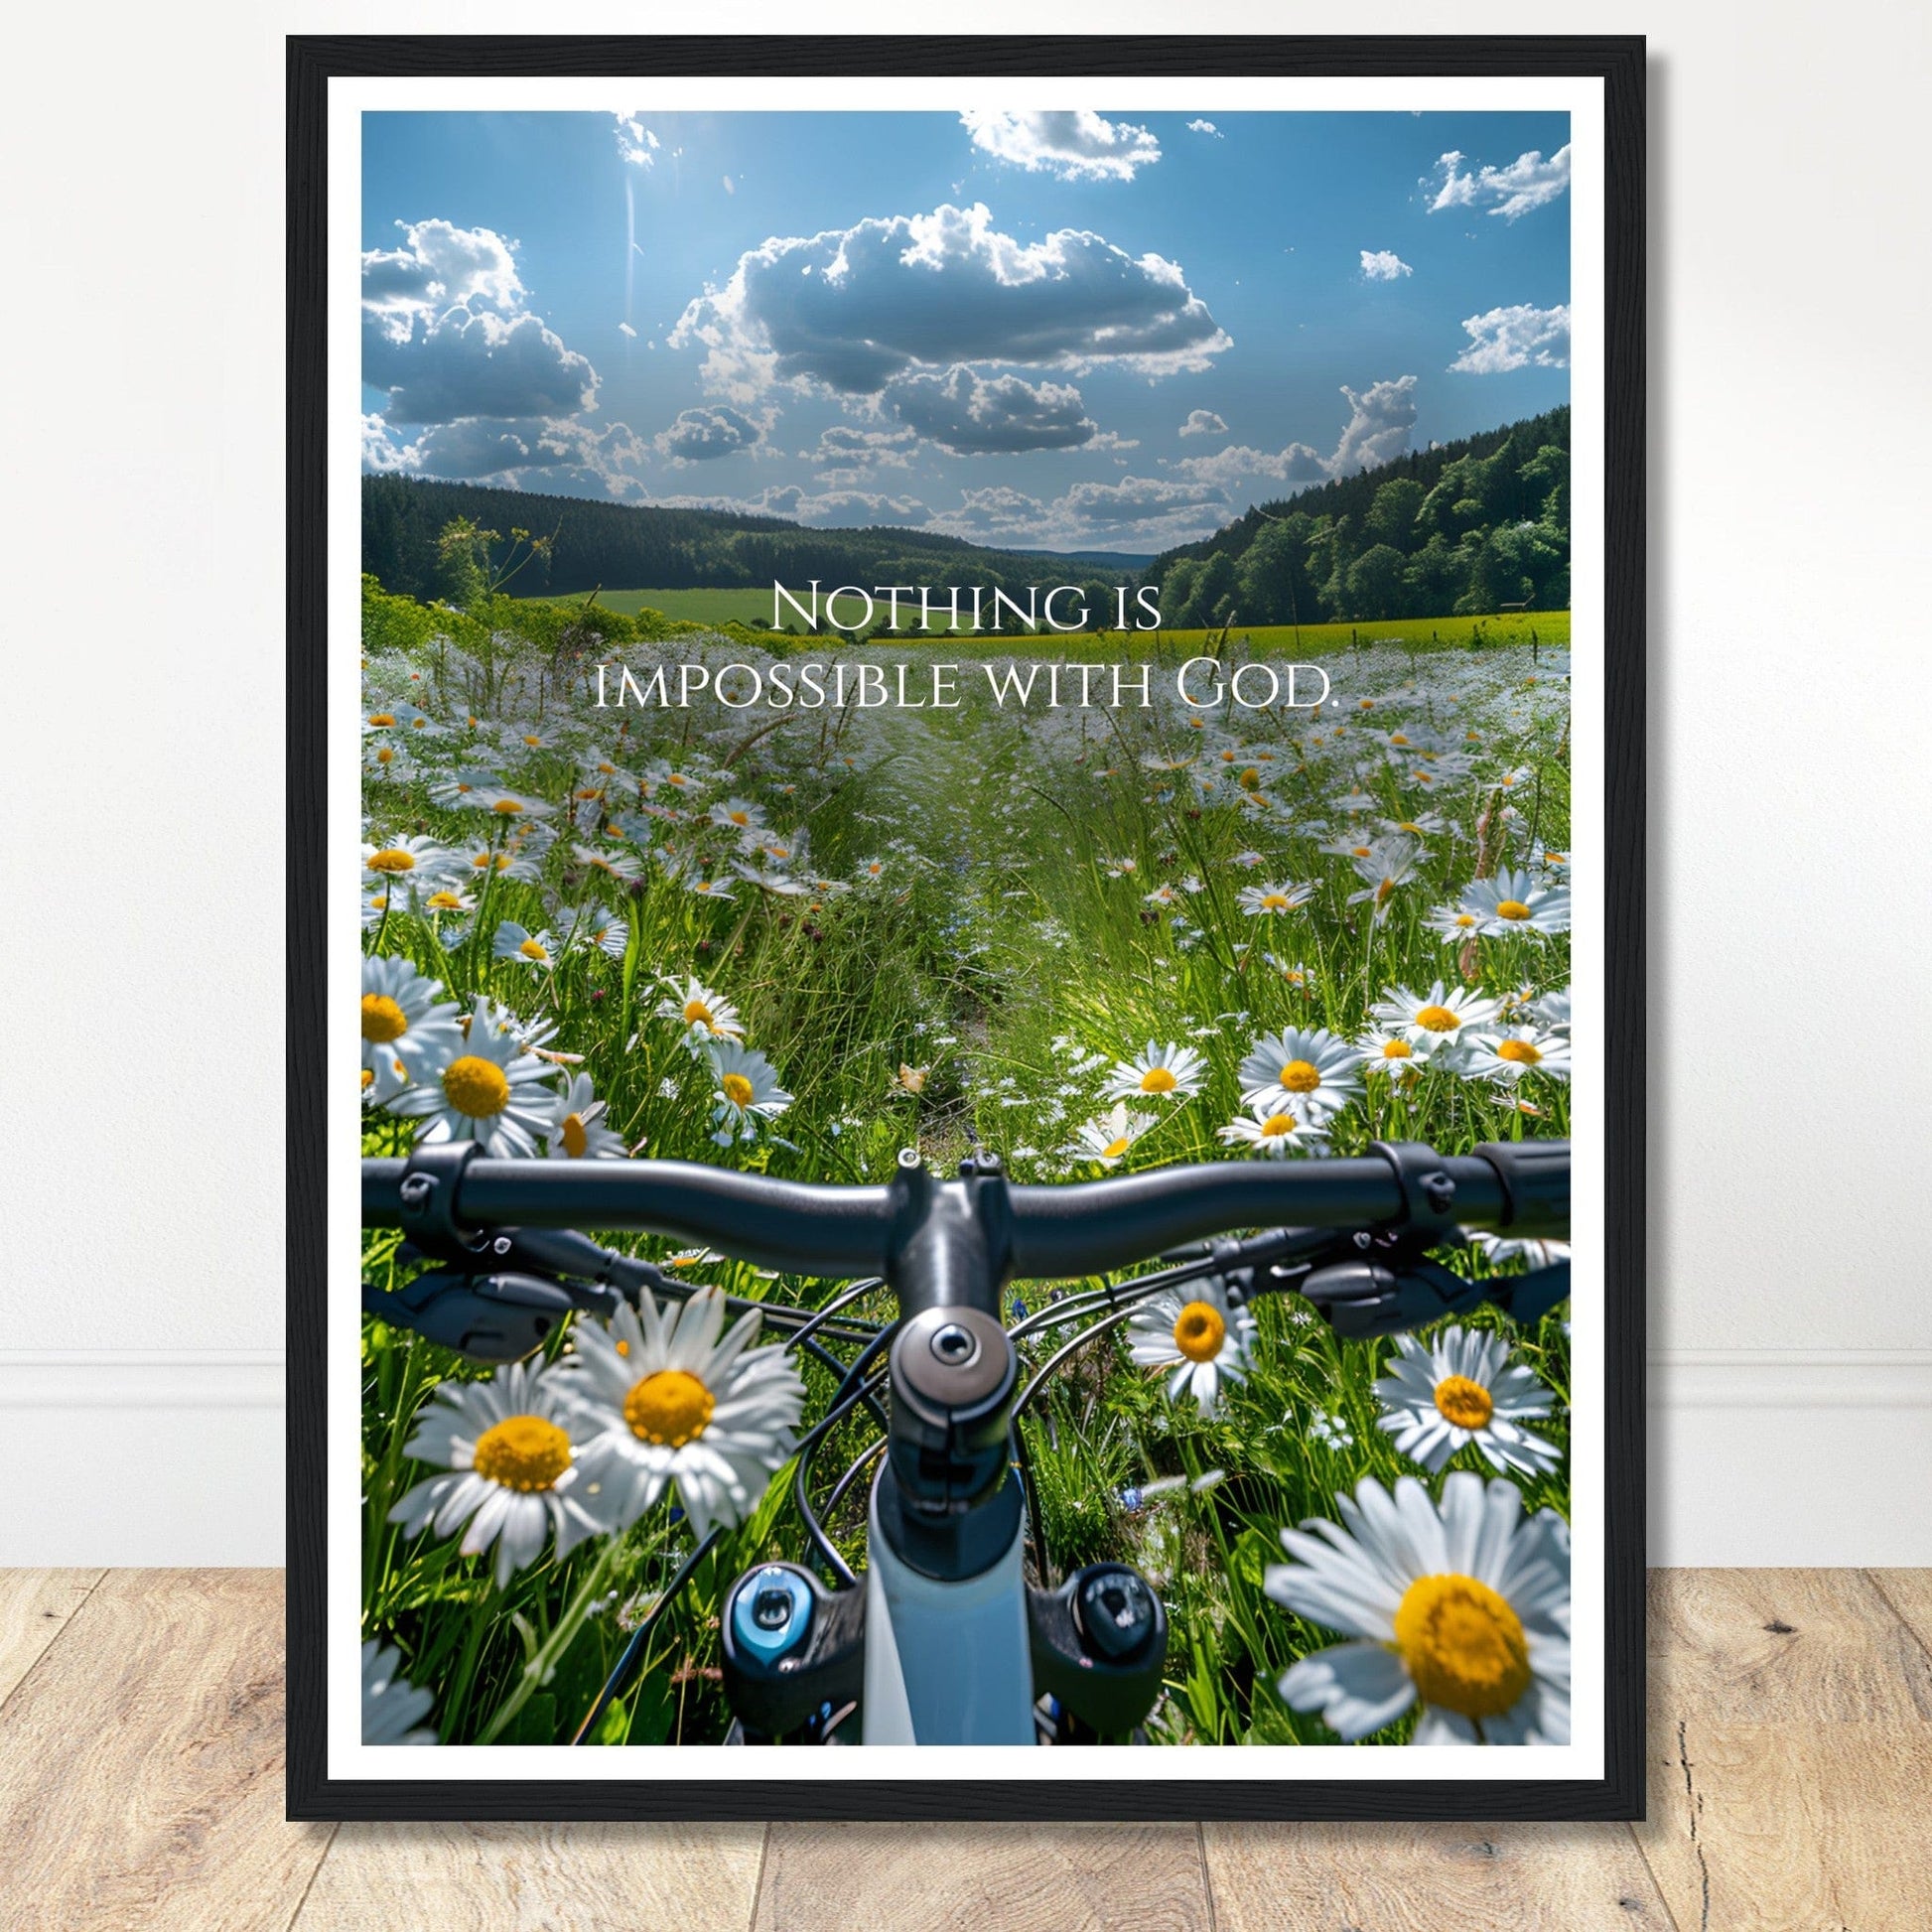 Coffee With My Father Print Material 45x60 cm / 18x24″ / Premium Matte Paper Wooden Framed Poster / Black frame Nothing is Impossible With God - Artwork